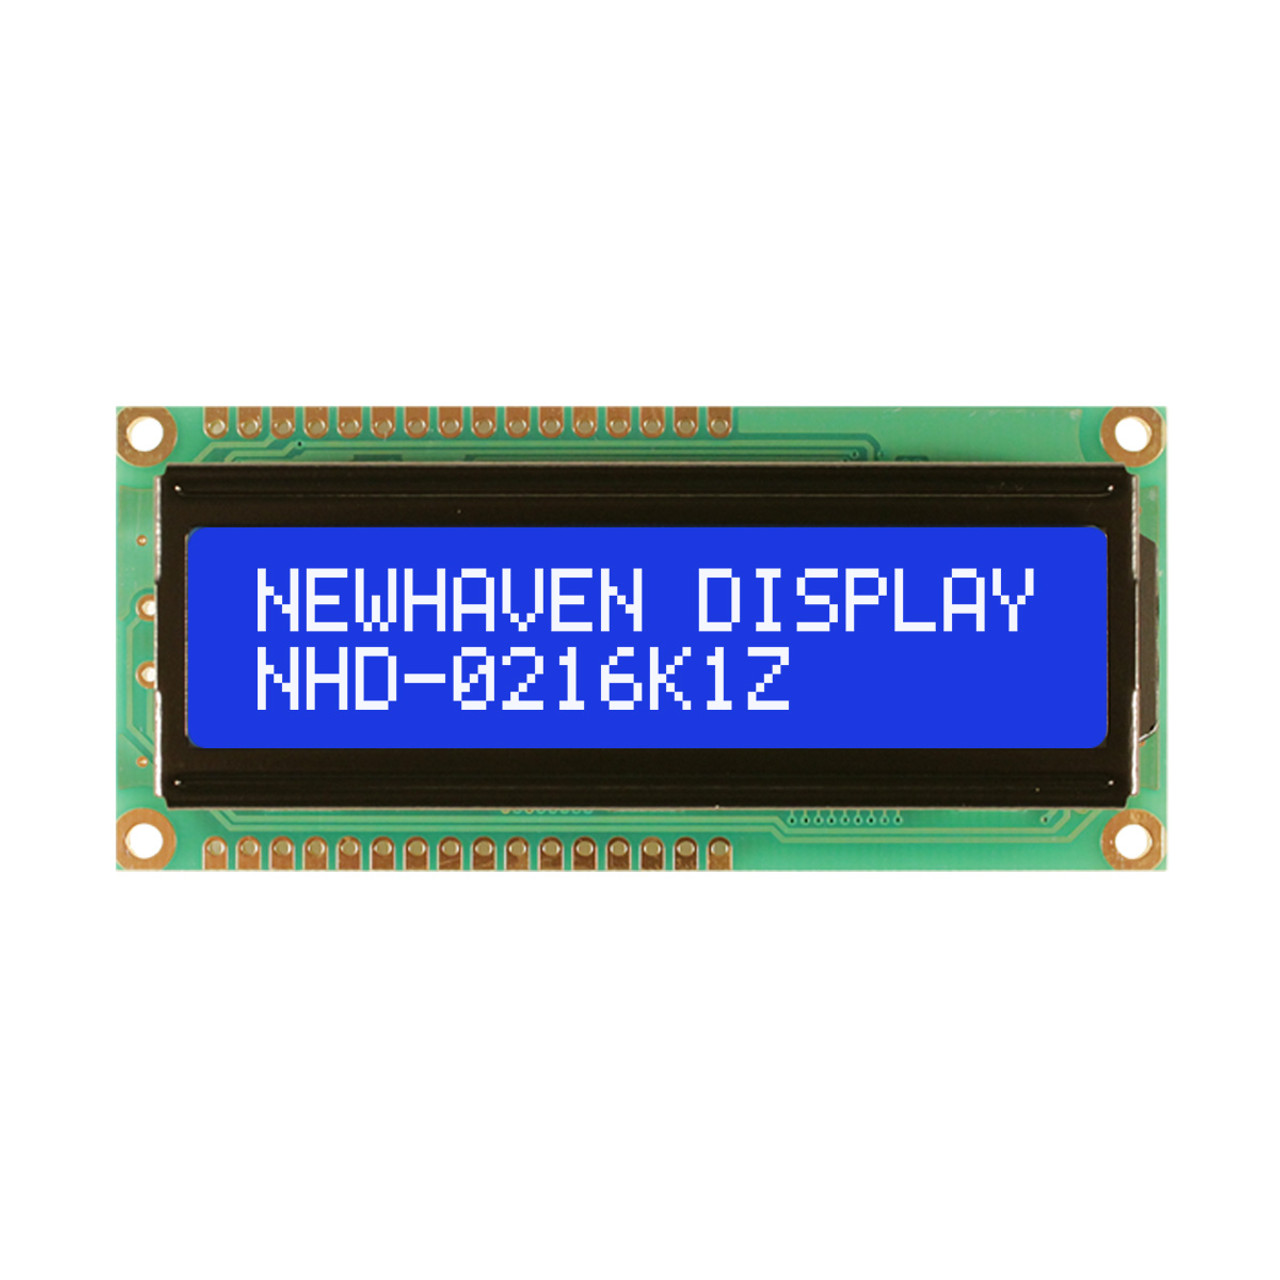 2X16 Character LCD | STN- Blue Display with White Side Backlight